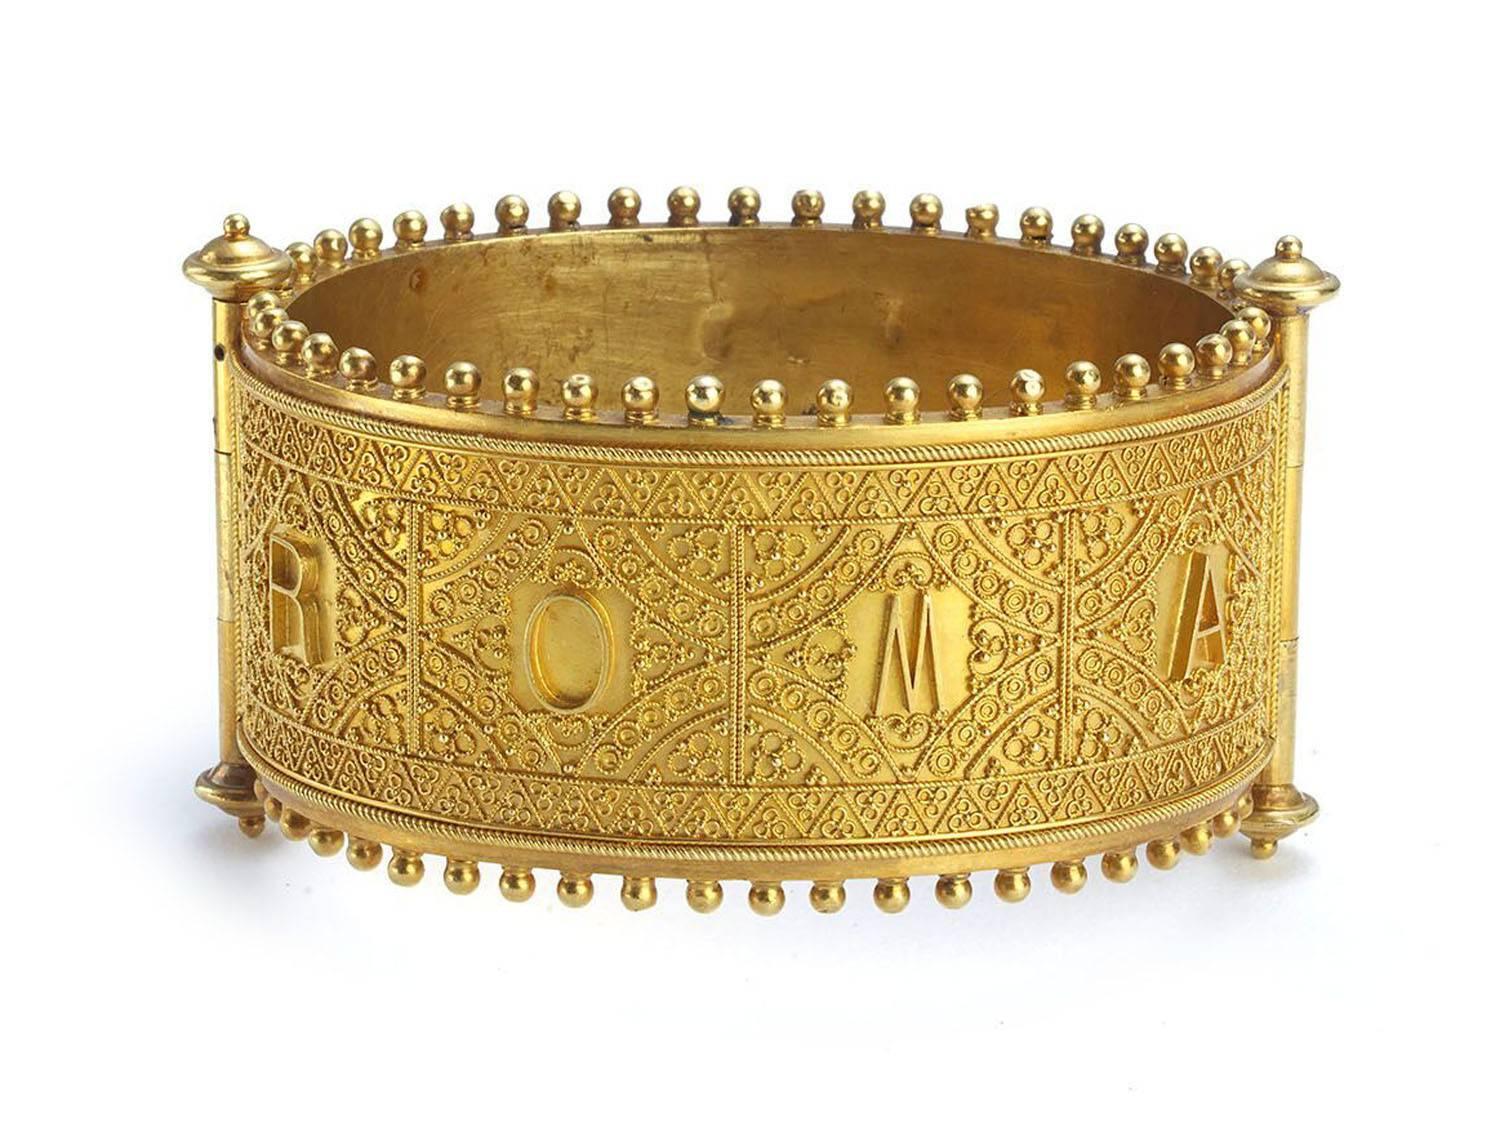 A 19th century broad hinged micro mosaic bangle, with Etruscan style fine bead and ropework decoration, the front is set with a rectangular micromosaic panel, after the work of Guido Reni on the ceiling of the garden pavilion of Palazzo Rospigliosi